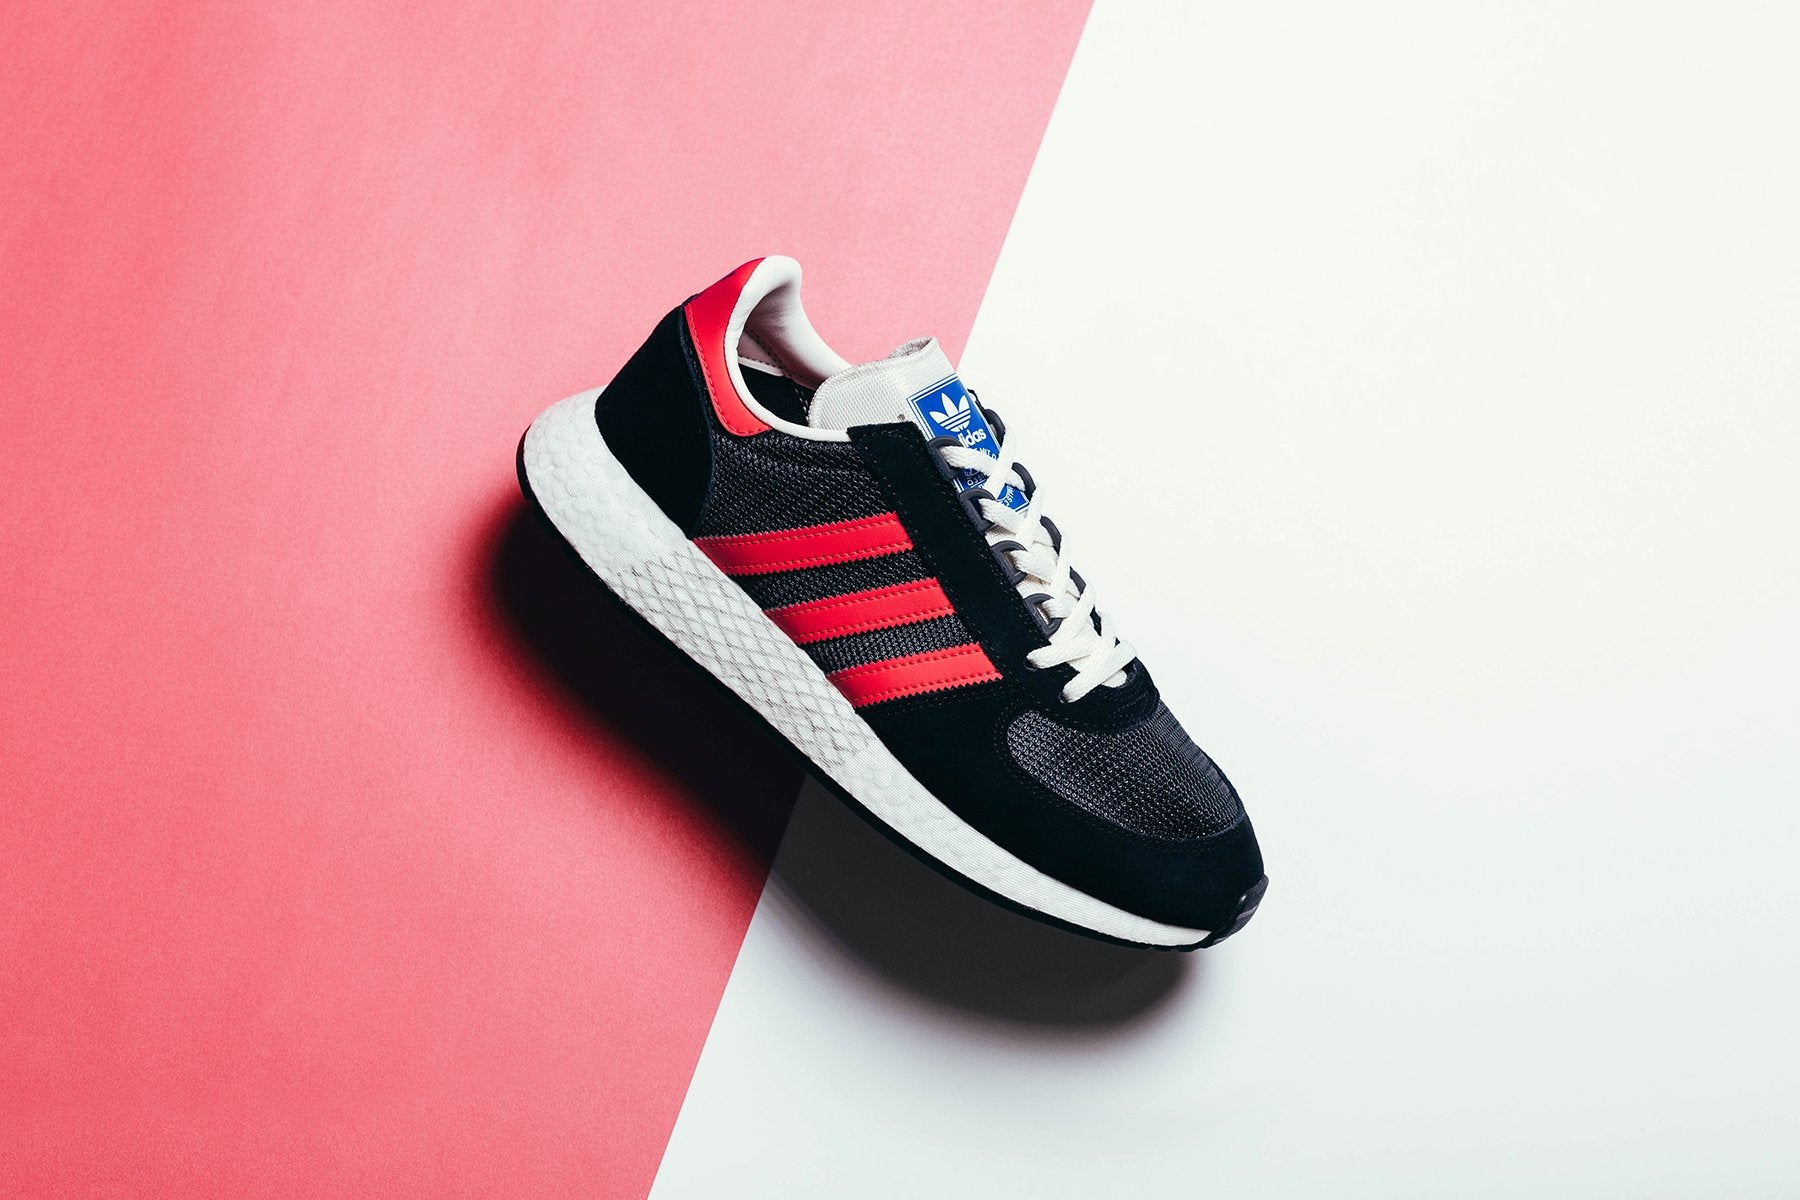 Adidas Marathon Tech "Carbon/Shock Red" Available Now – Feature